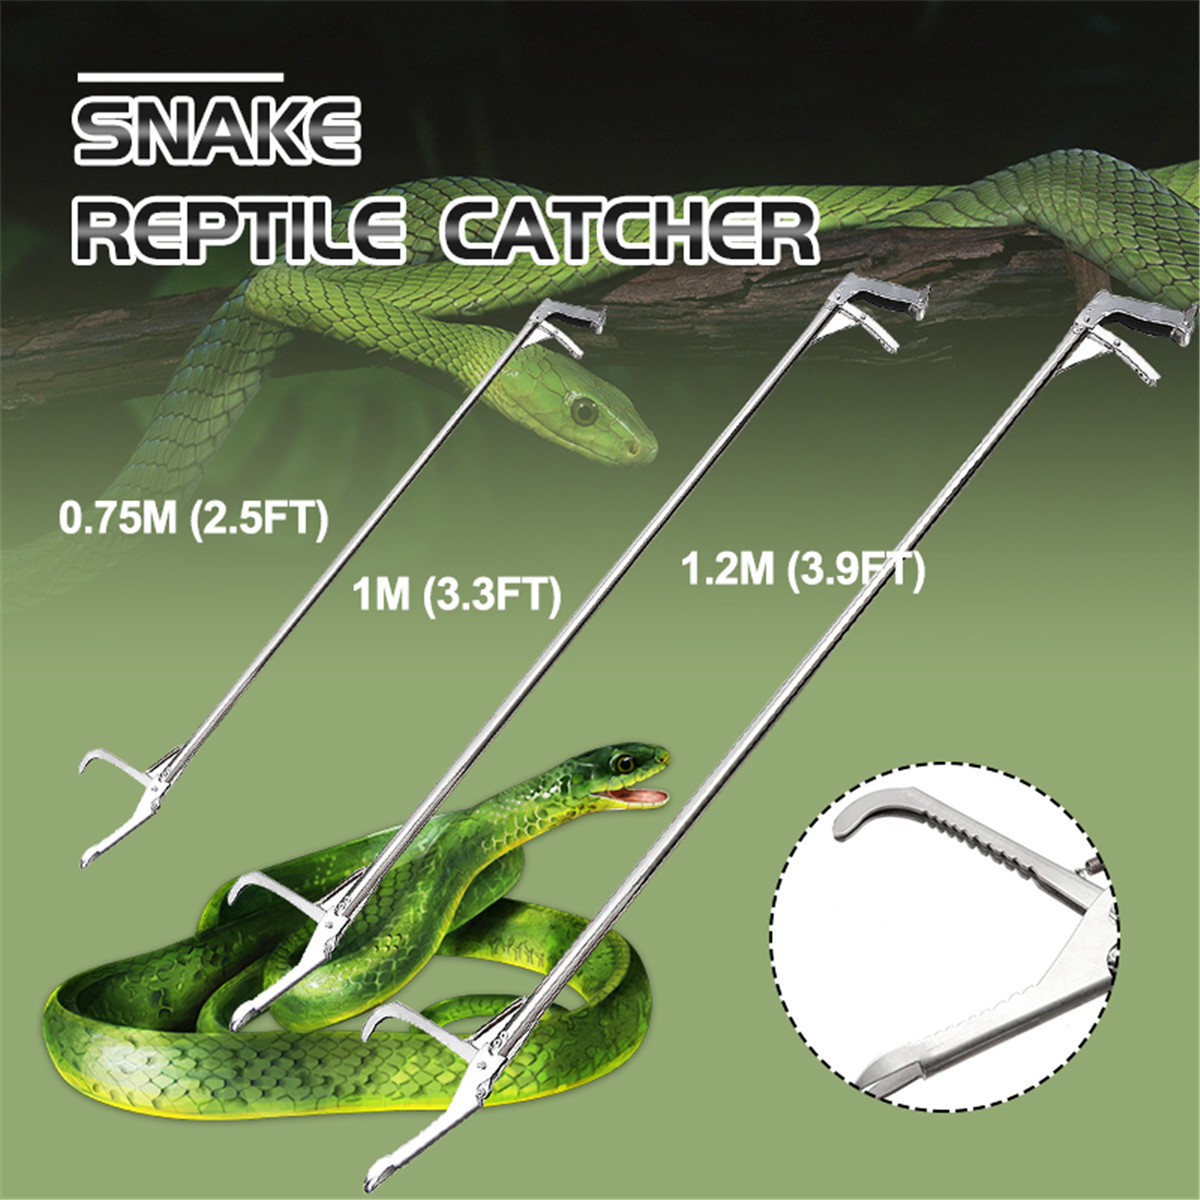 Stainless Steel Reptile Snake Catcher Professional Snake Tongs Stick Grabber Wide Jaw Tool Heavy Pest Control Product